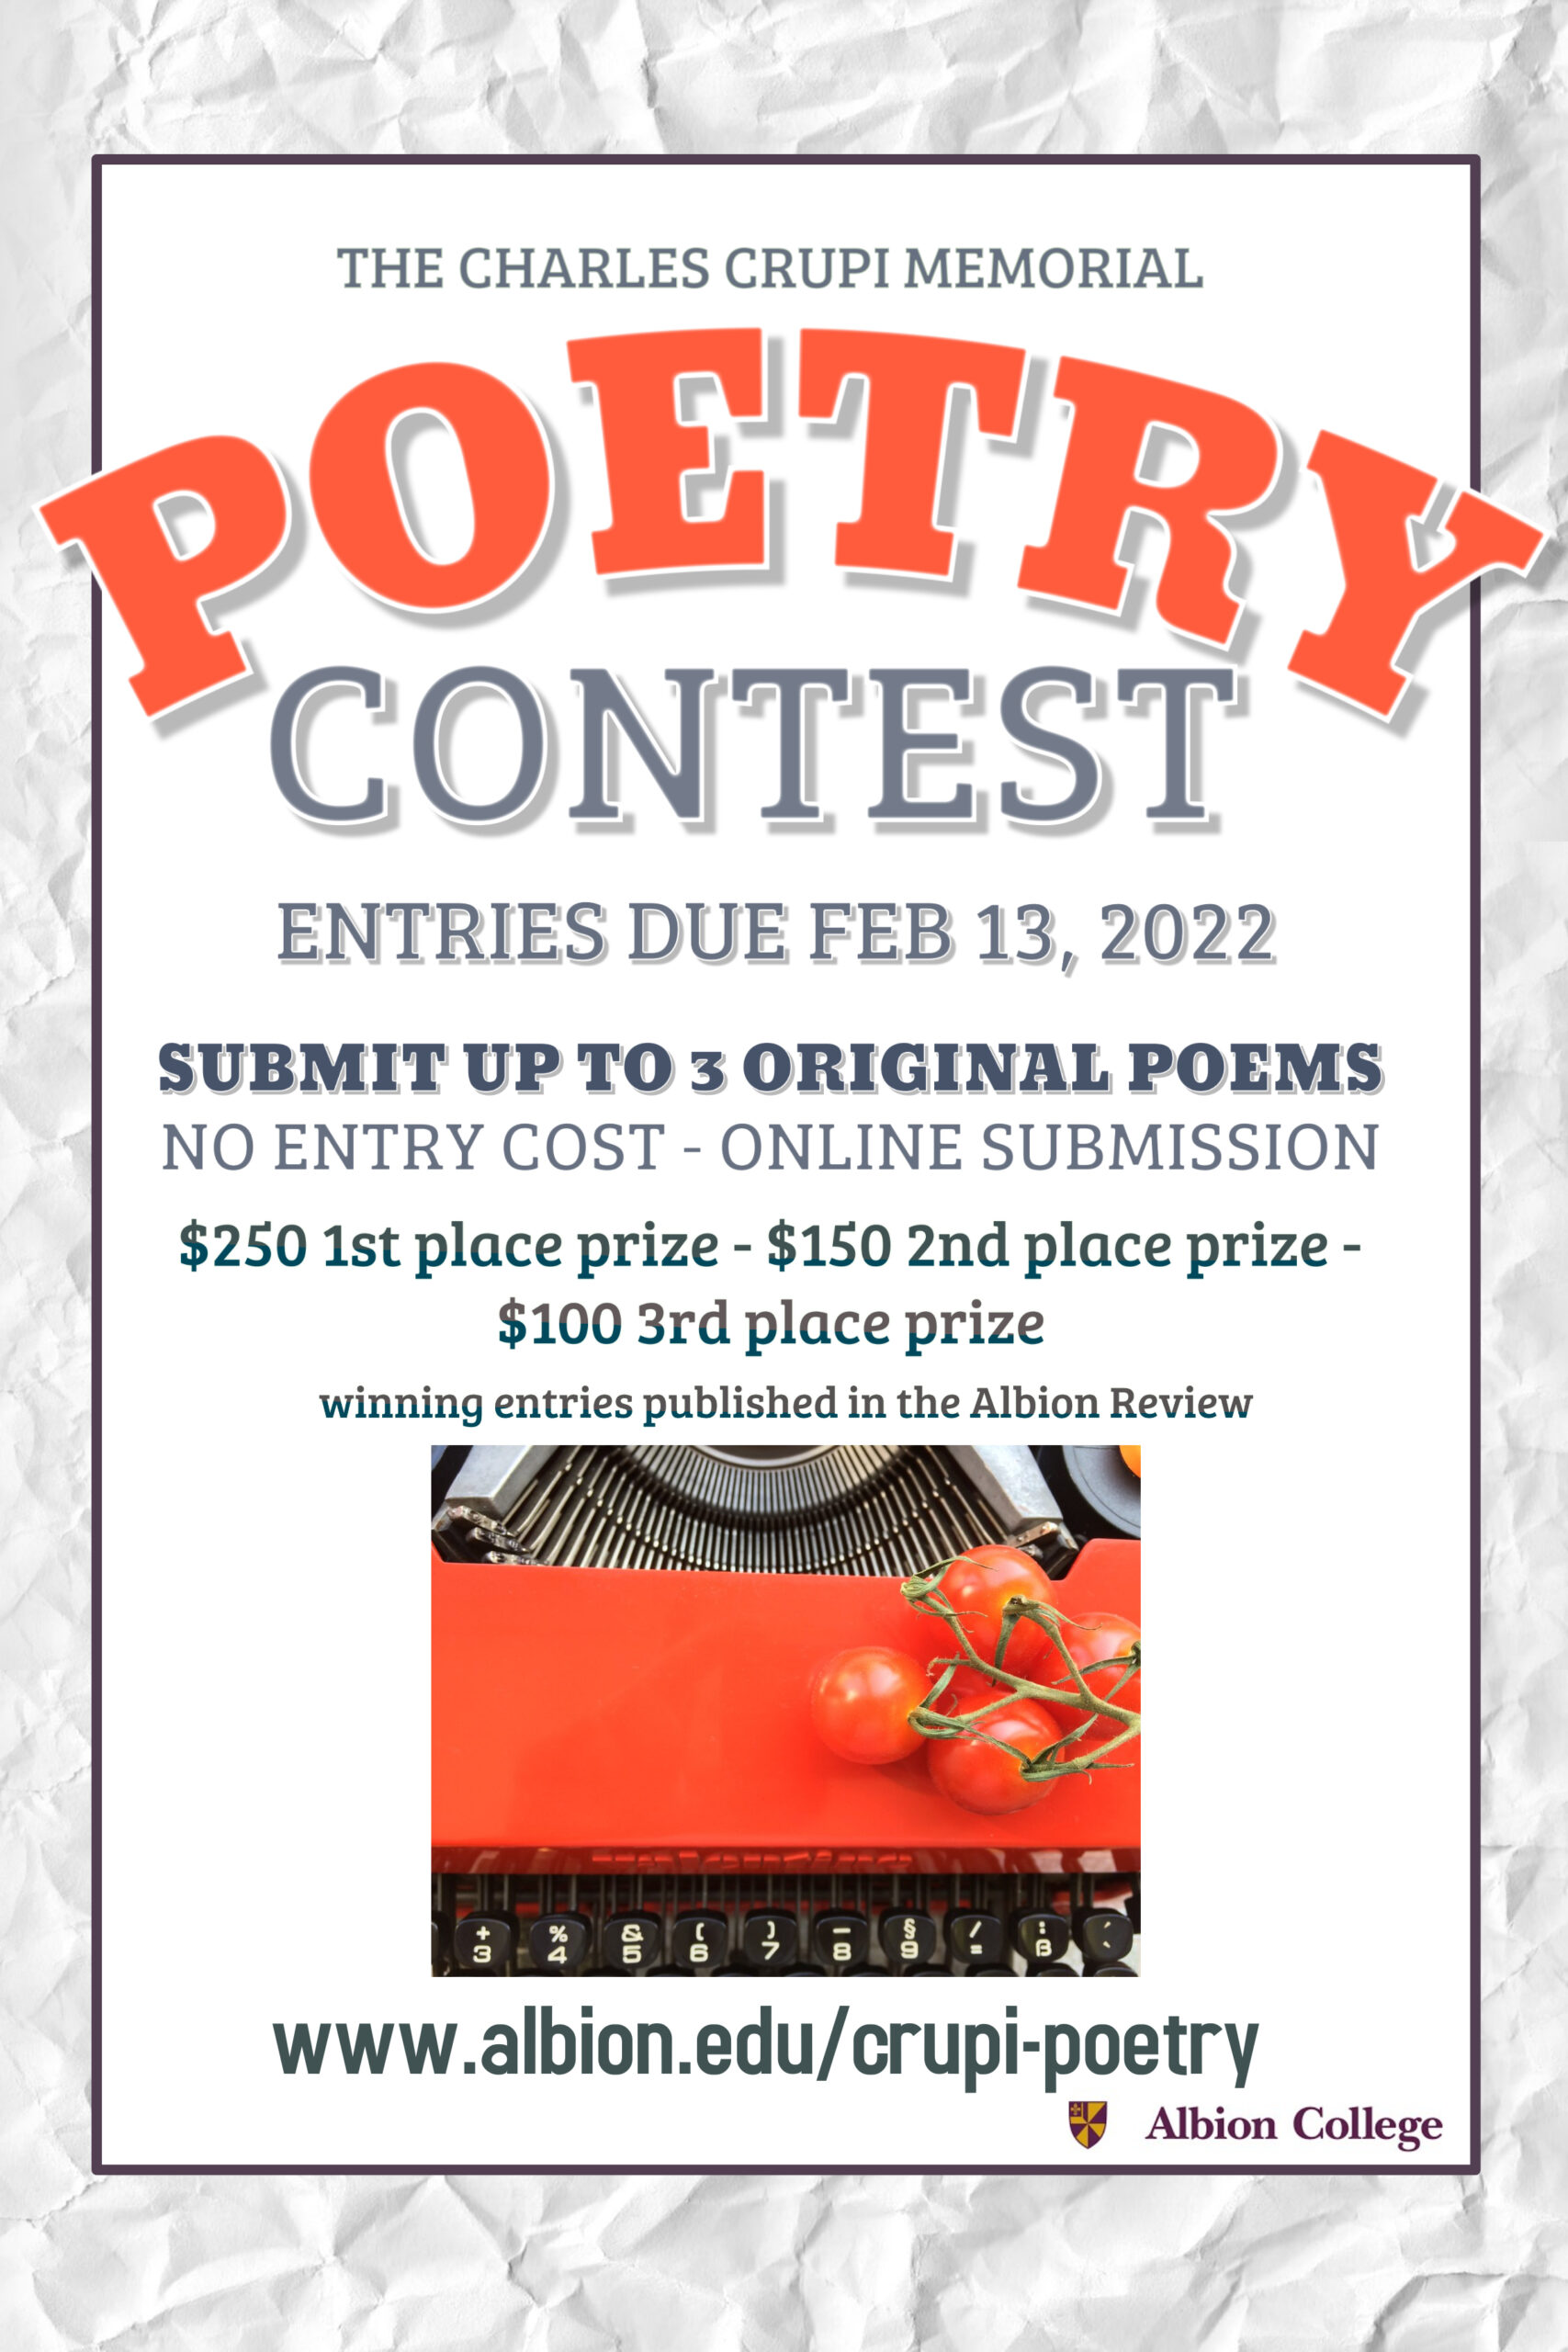 The Charles Crupi Memorial Poetry Contest. Entries due February 7, 2021. Submit up to 3 original poems. No entry cost - online submission. $250 1st place prize, $150 2nd place prize, $100 3rd place prize. Winning entries published in the Albion Review. 